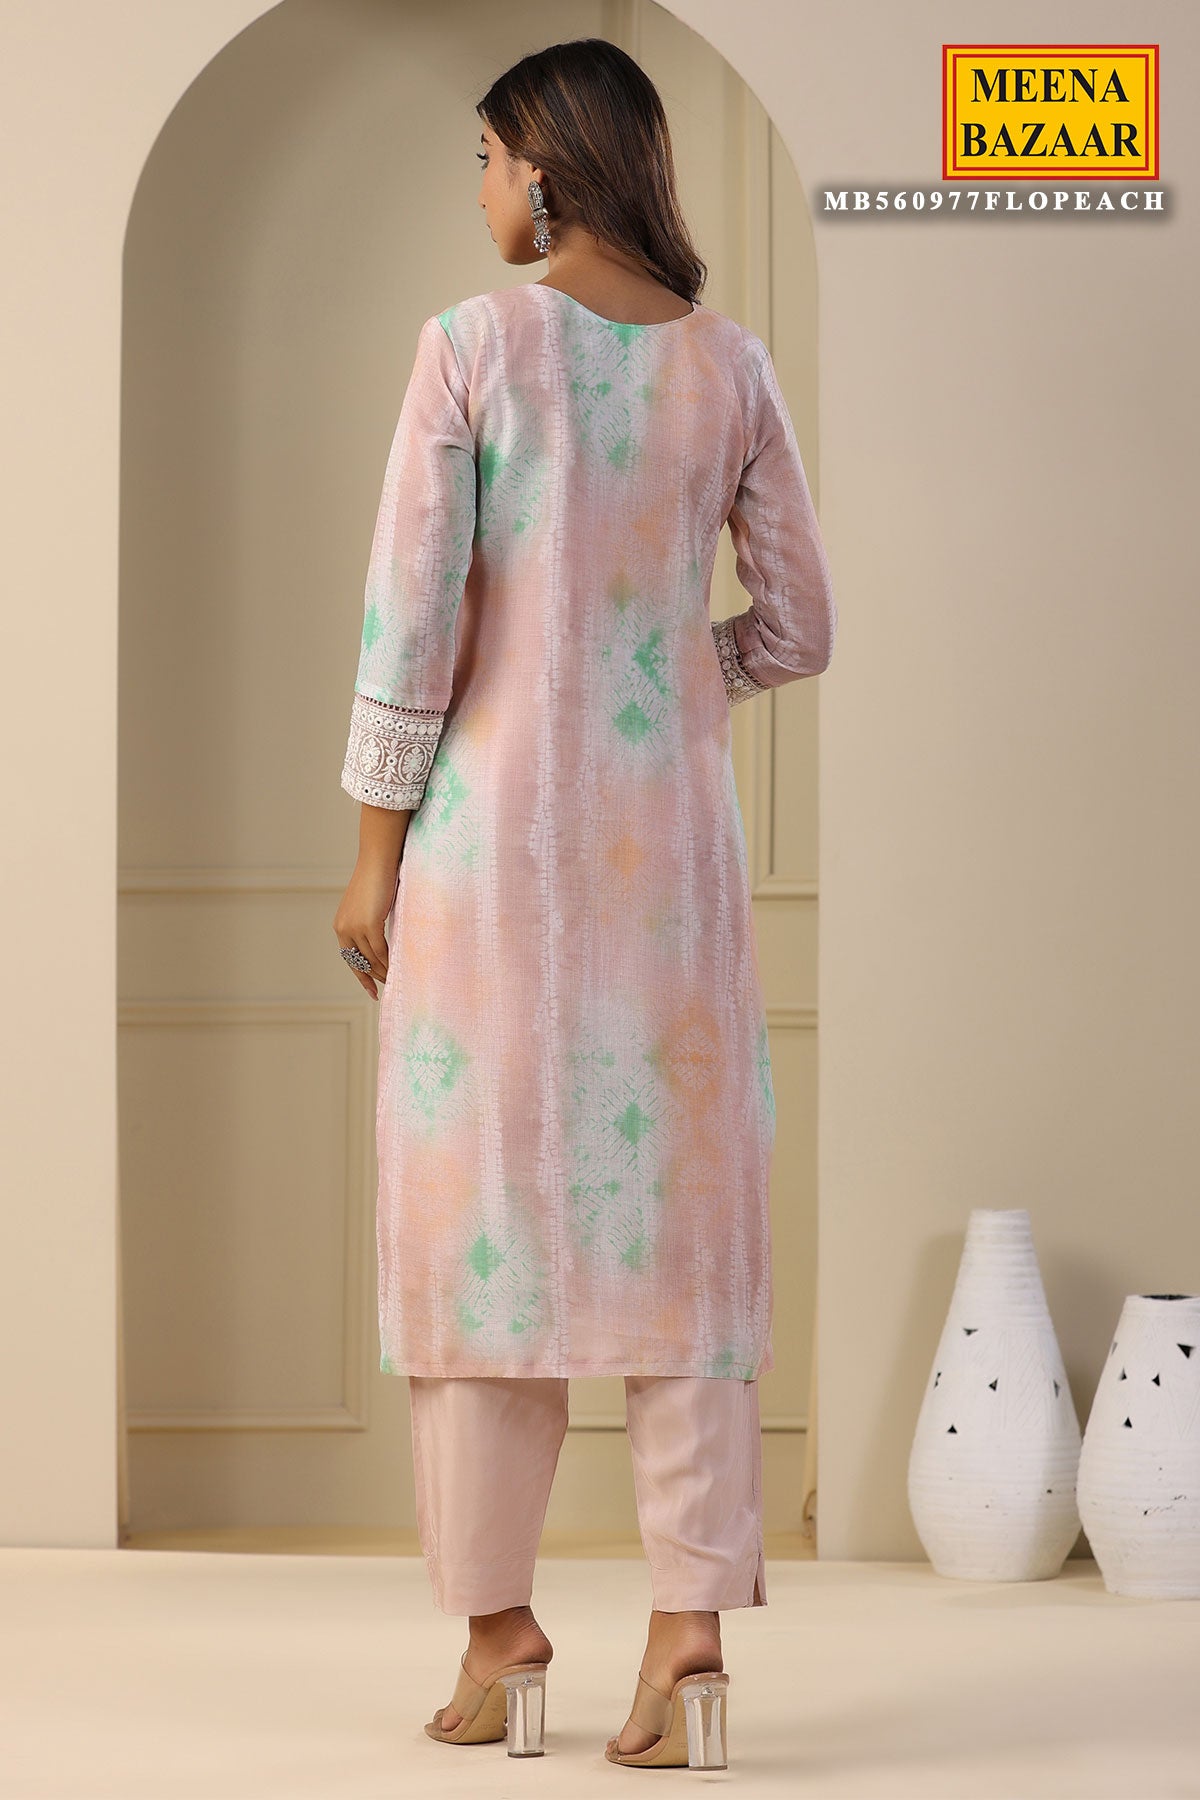 Peach Cotton Embroidered Suit with Cutouts